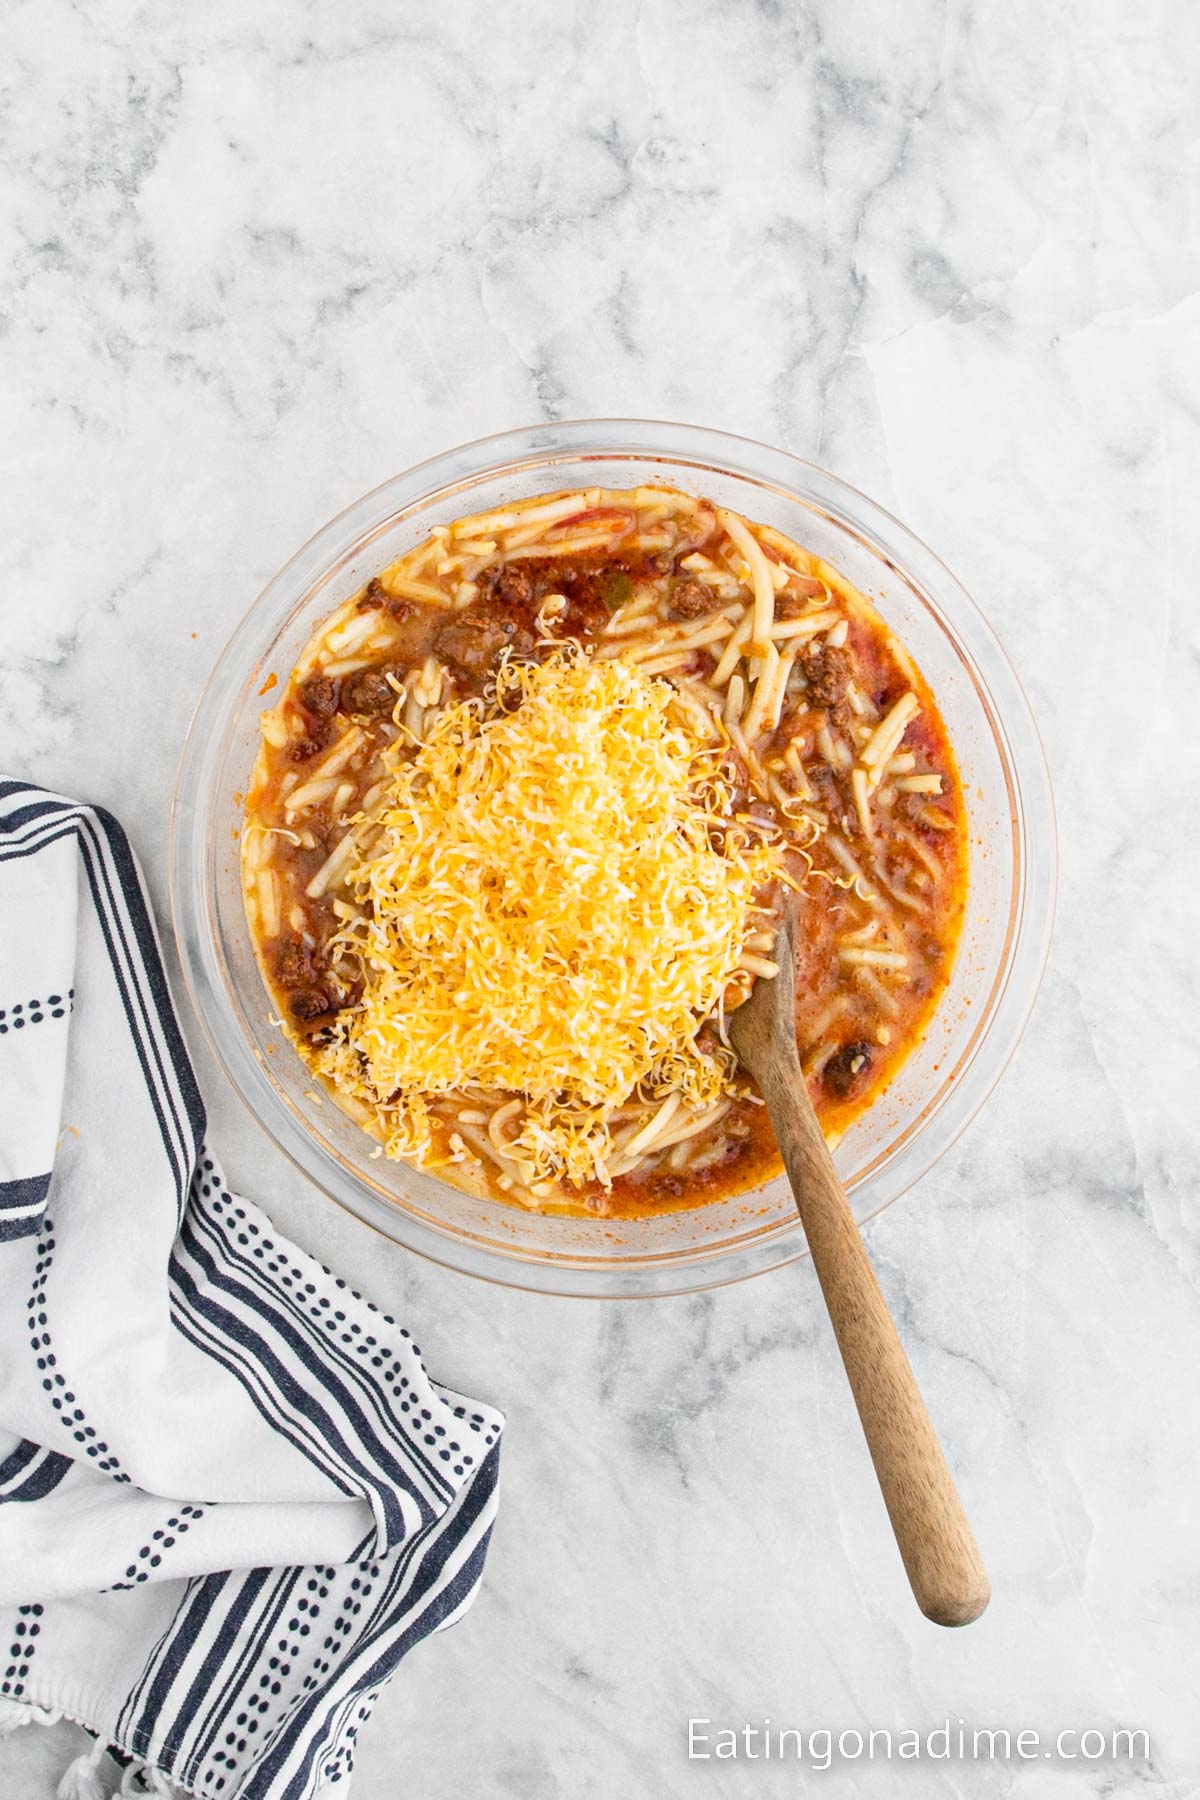 Mix in shredded cheese in a bowl